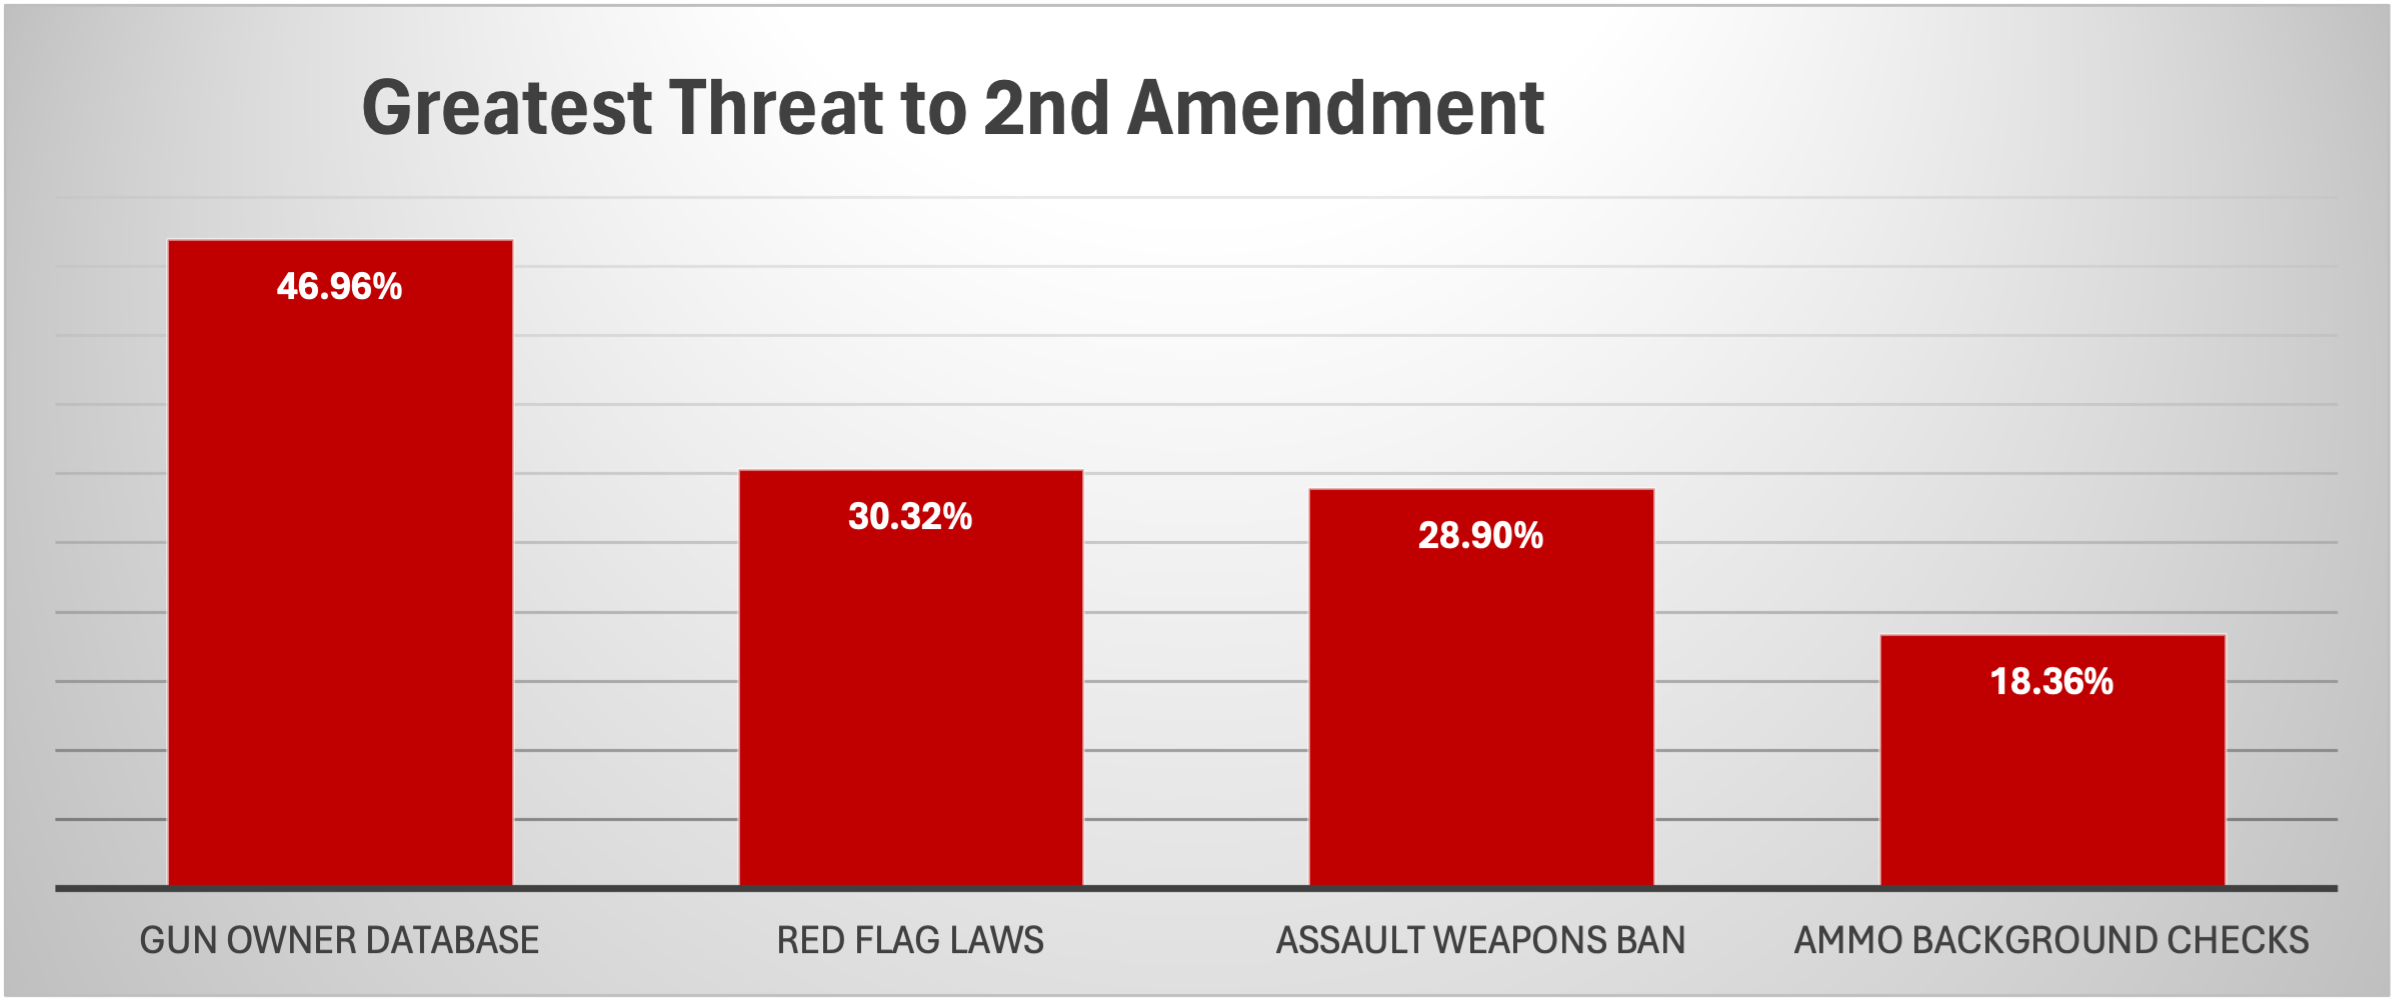 Survey results asking about what the greatest threat to the 2nd Amendment is.